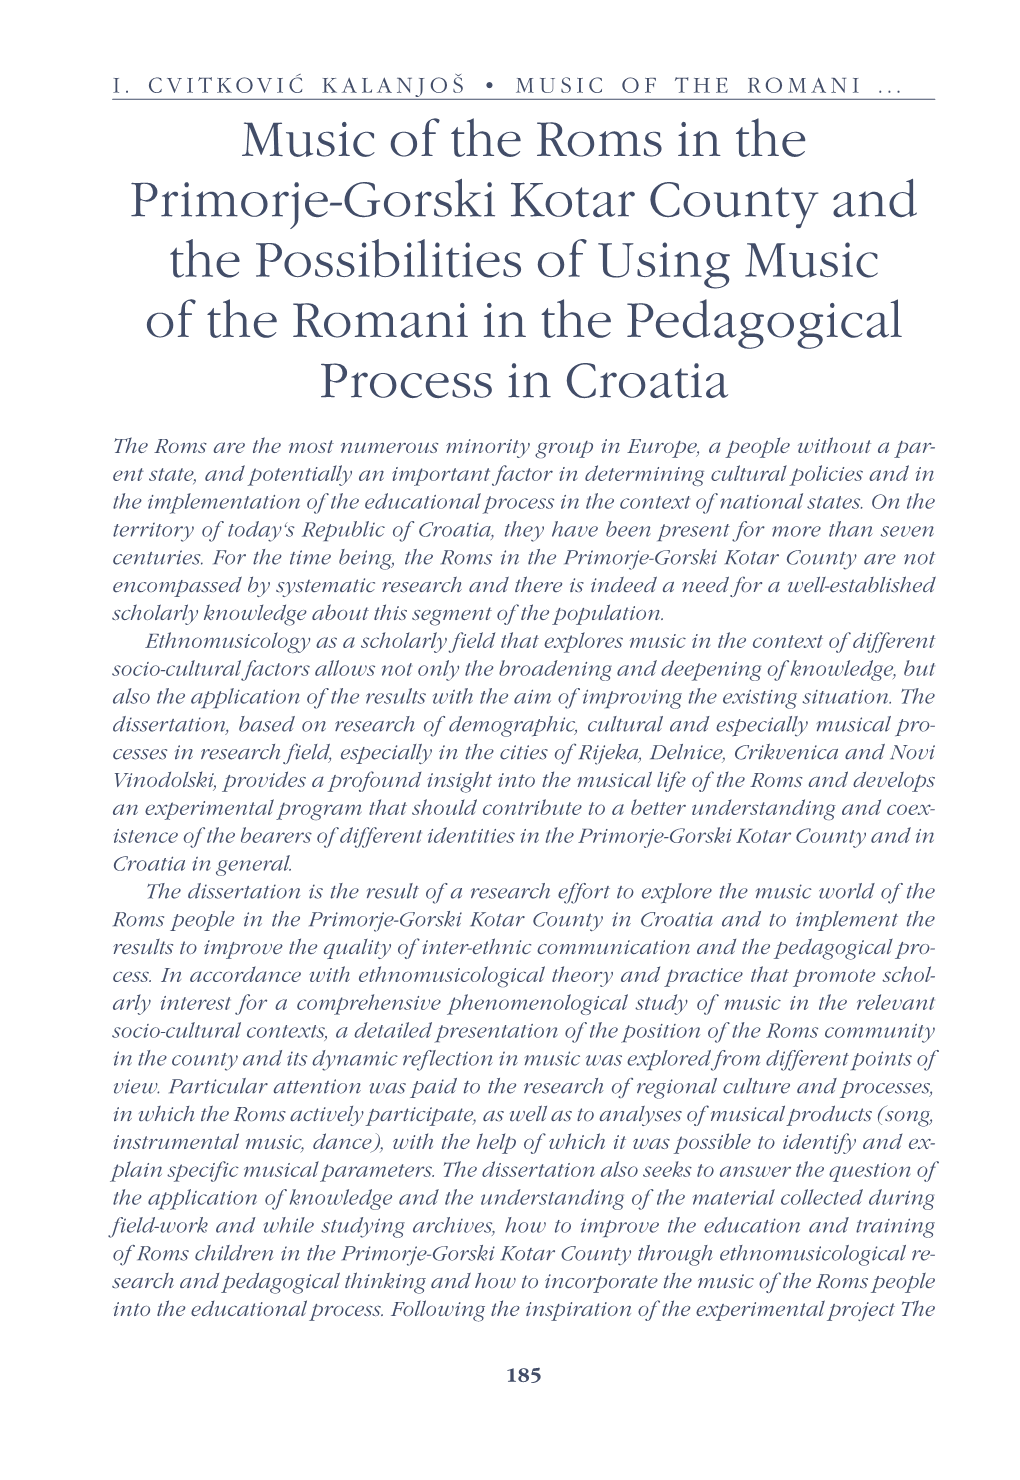 Music of the Roms in the Primorje-Gorski Kotar County and the Possibilities of Using Music of the Romani in the Pedagogical Process in Croatia